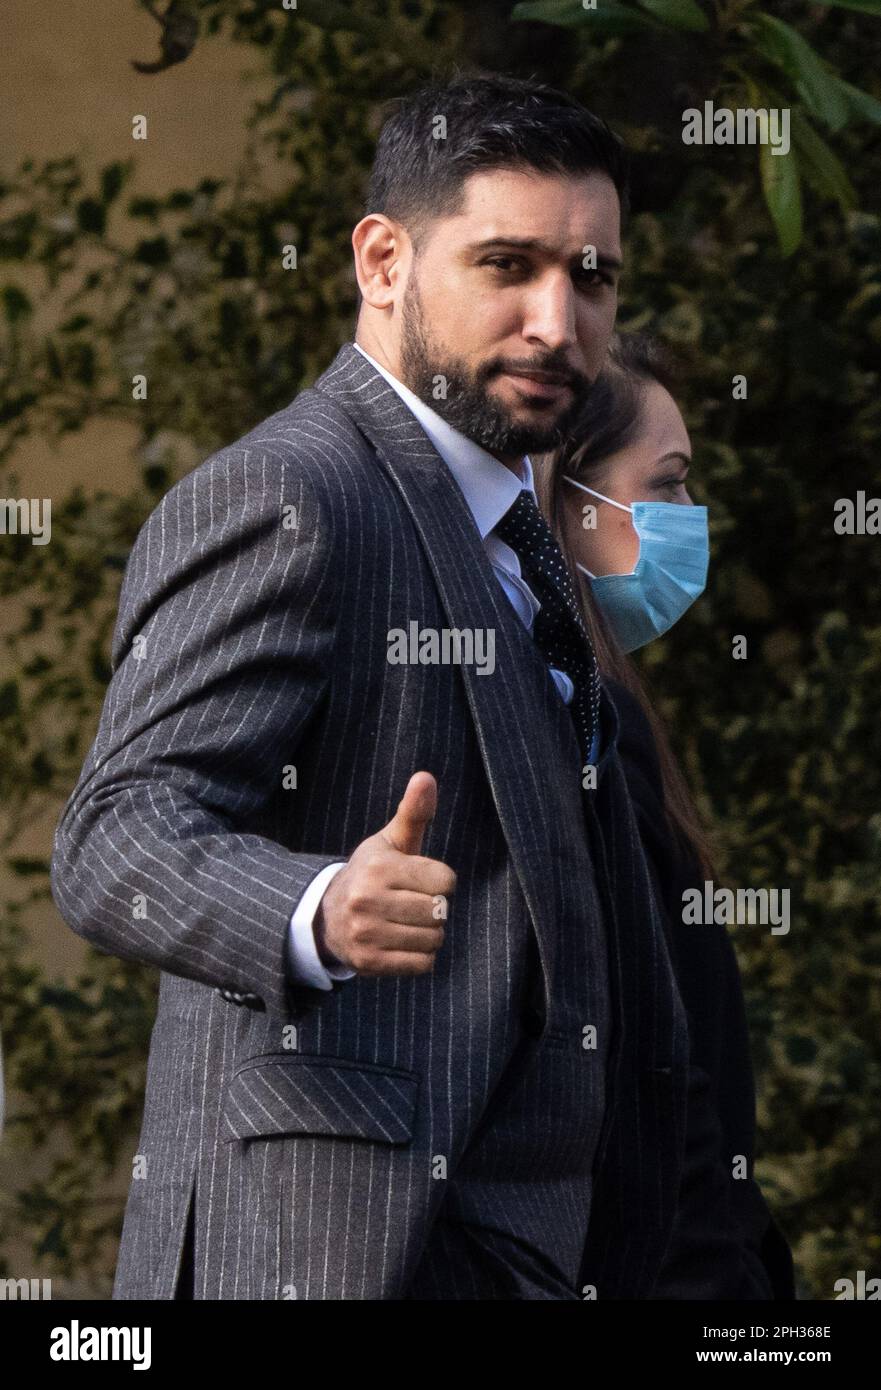 File photo dated 14/03/23 of former world boxing champion Amir Khan, gives a thumbs up as he arrives at Snaresbrook Crown Court, in east London. Mr Khan feared his 'kids would grow up without their dad' during the gunpoint robbery of his £70,000 diamond-encrusted watch. The 2004 Olympic silver medallist, 36, was targeted as he and his wife, Faryal Makhdoom, 31, left the Sahara Grill restaurant in Leyton, east London, on April 18 last year. Issue date: Saturday March 25, 2023. Stock Photo